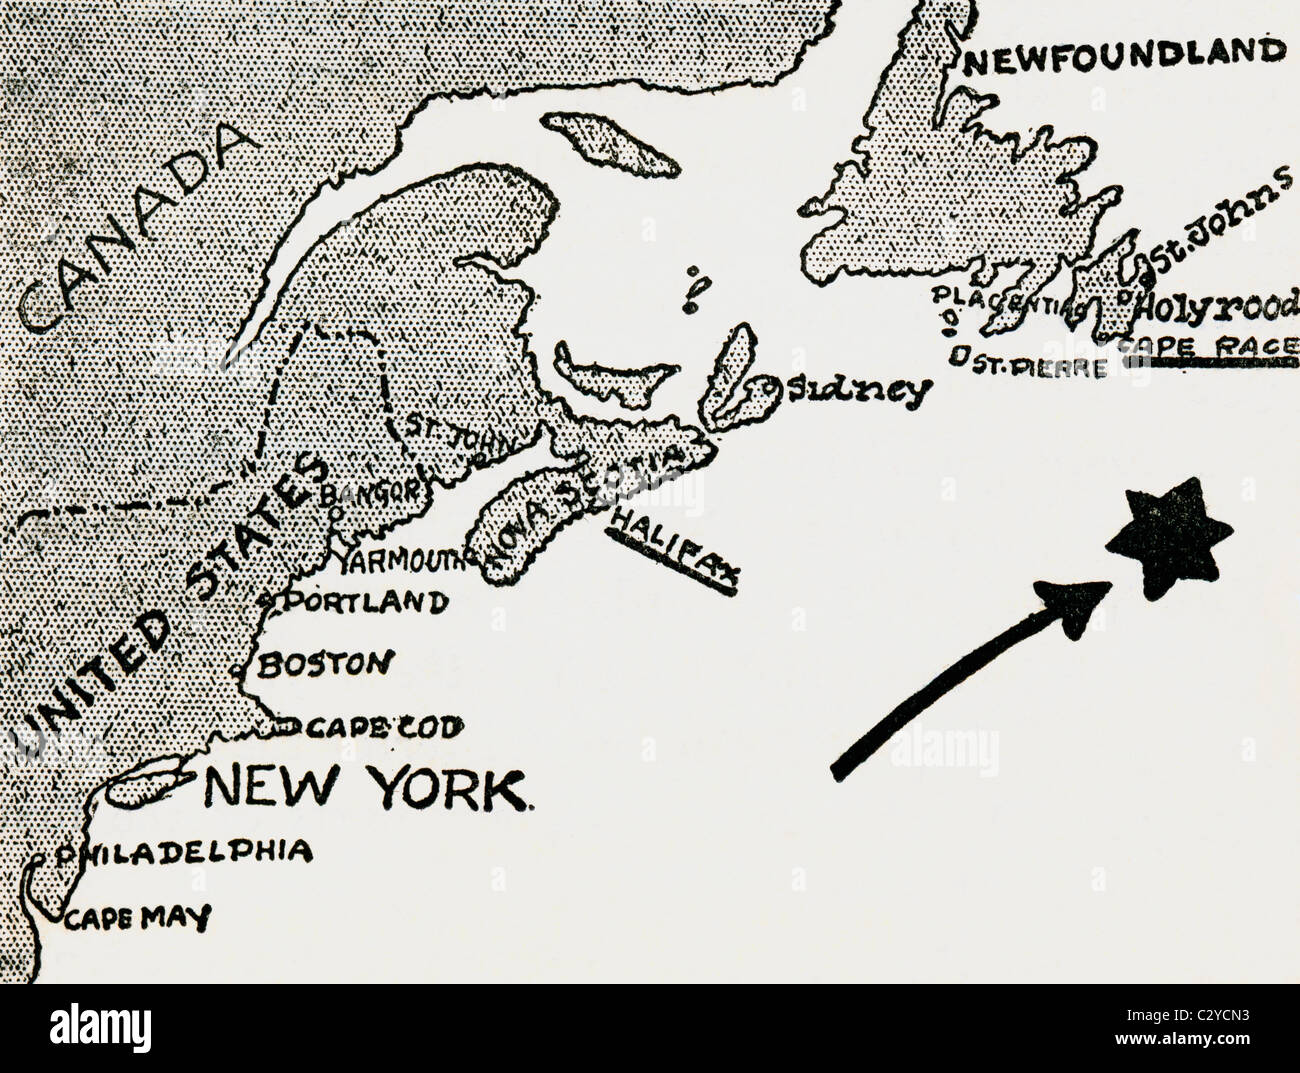 Map of approximate site of the Titanic disaster. Stock Photo